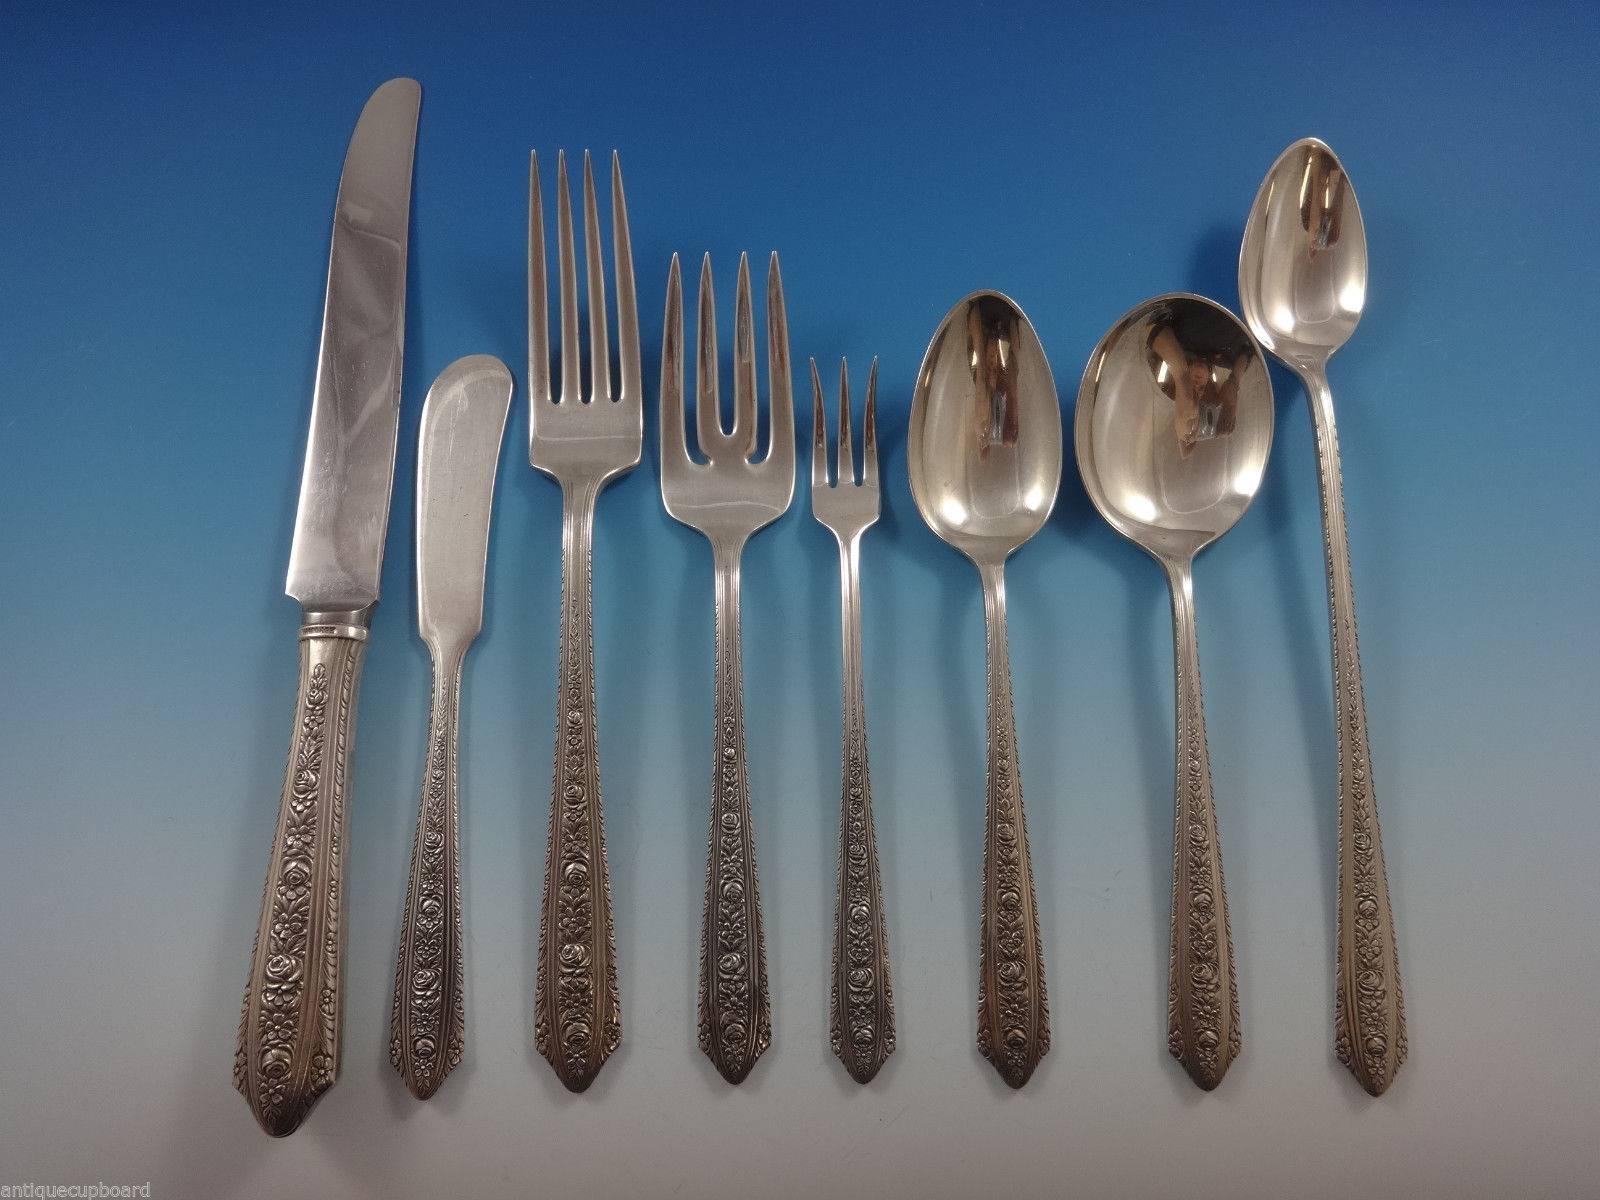 Beautiful large Normandie by Wallace sterling silver flatware set, 99 pieces. This set includes:

12 knives, 8 3/4